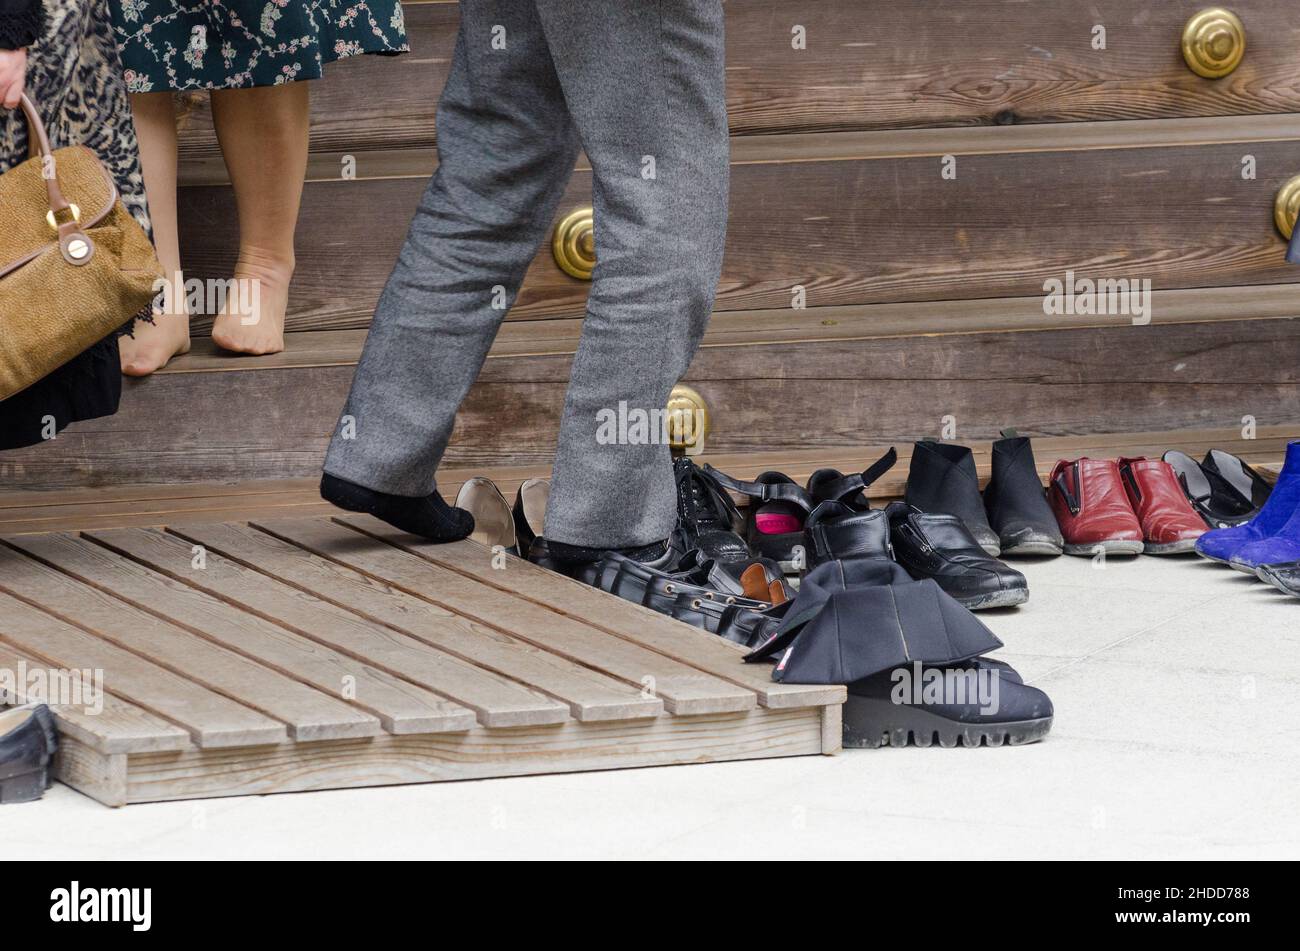 Man leaving his shoes next to existing ones at the entrance to Ise Jingu shrine in Ise, Japan. Stock Photo